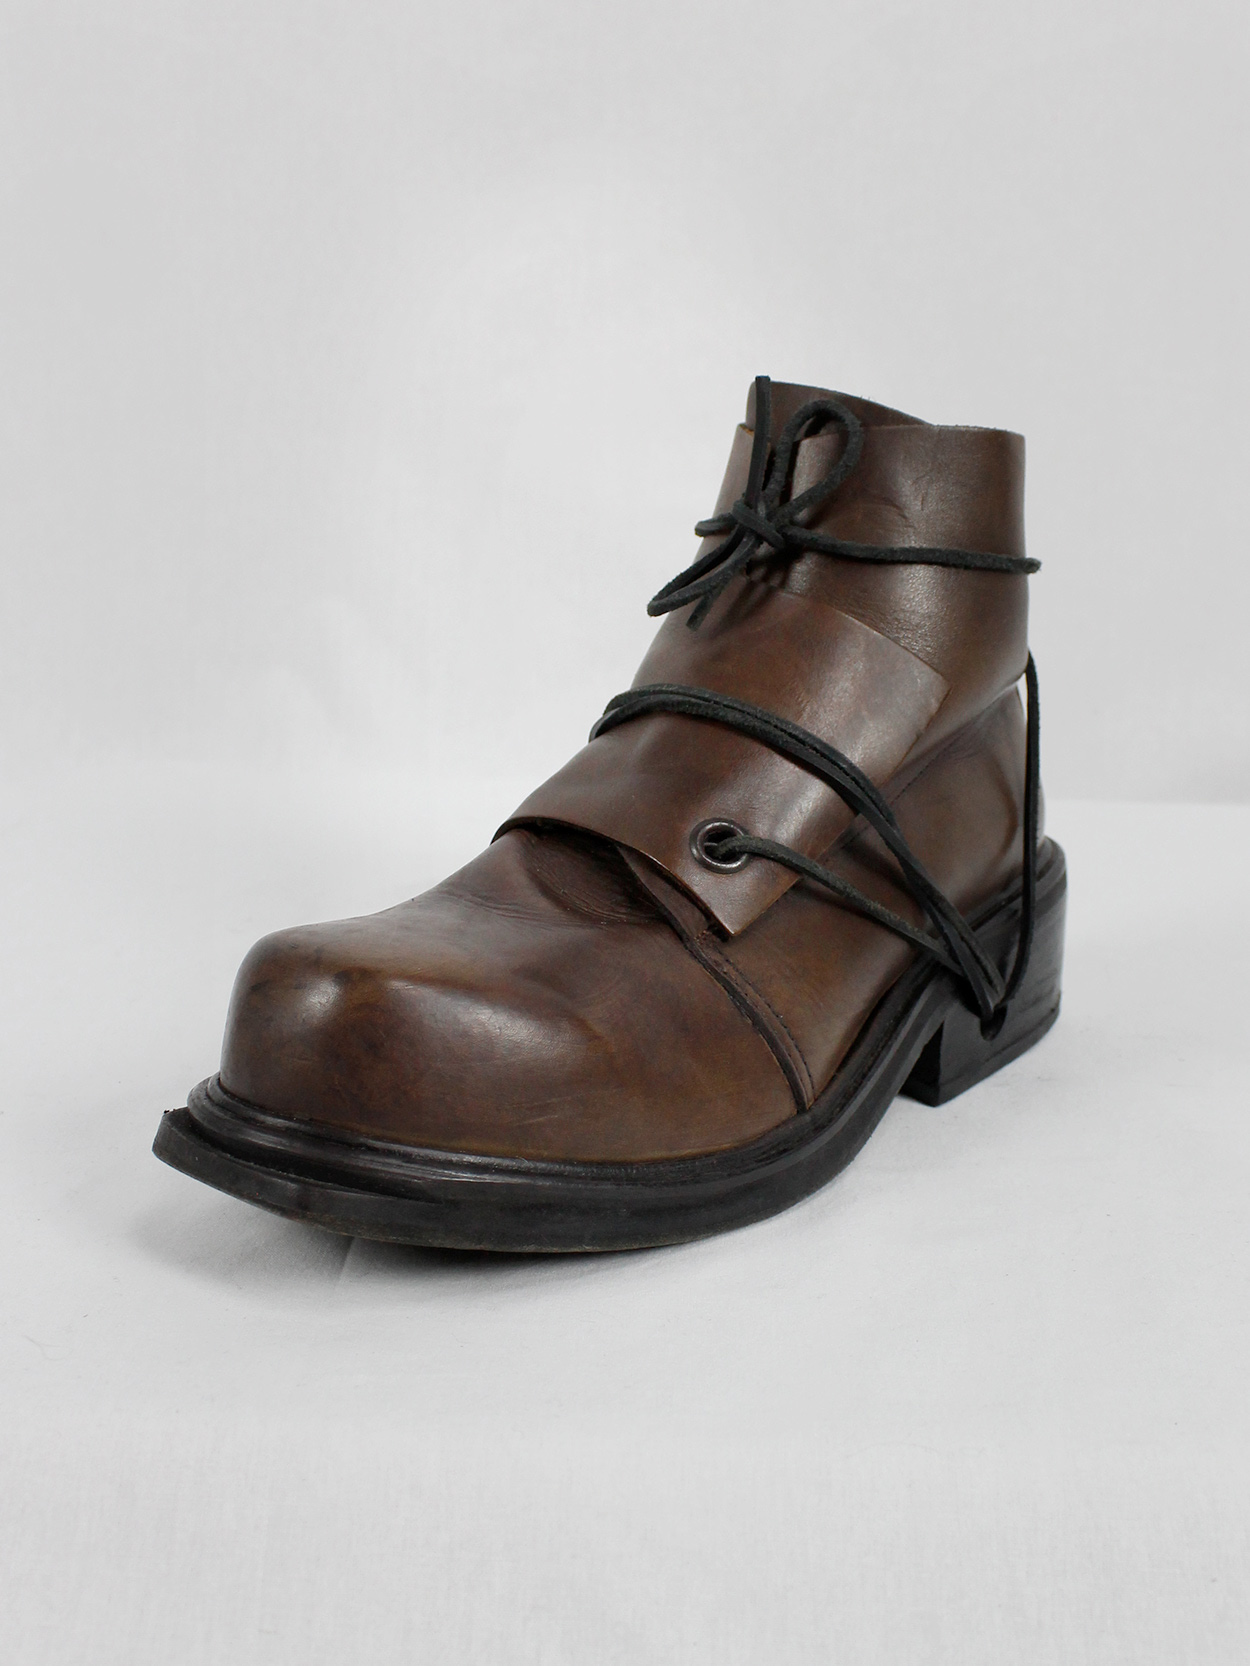 Dirk Bikkembergs brown mountaineering boots with laces through the soles 90s 1990s (13)